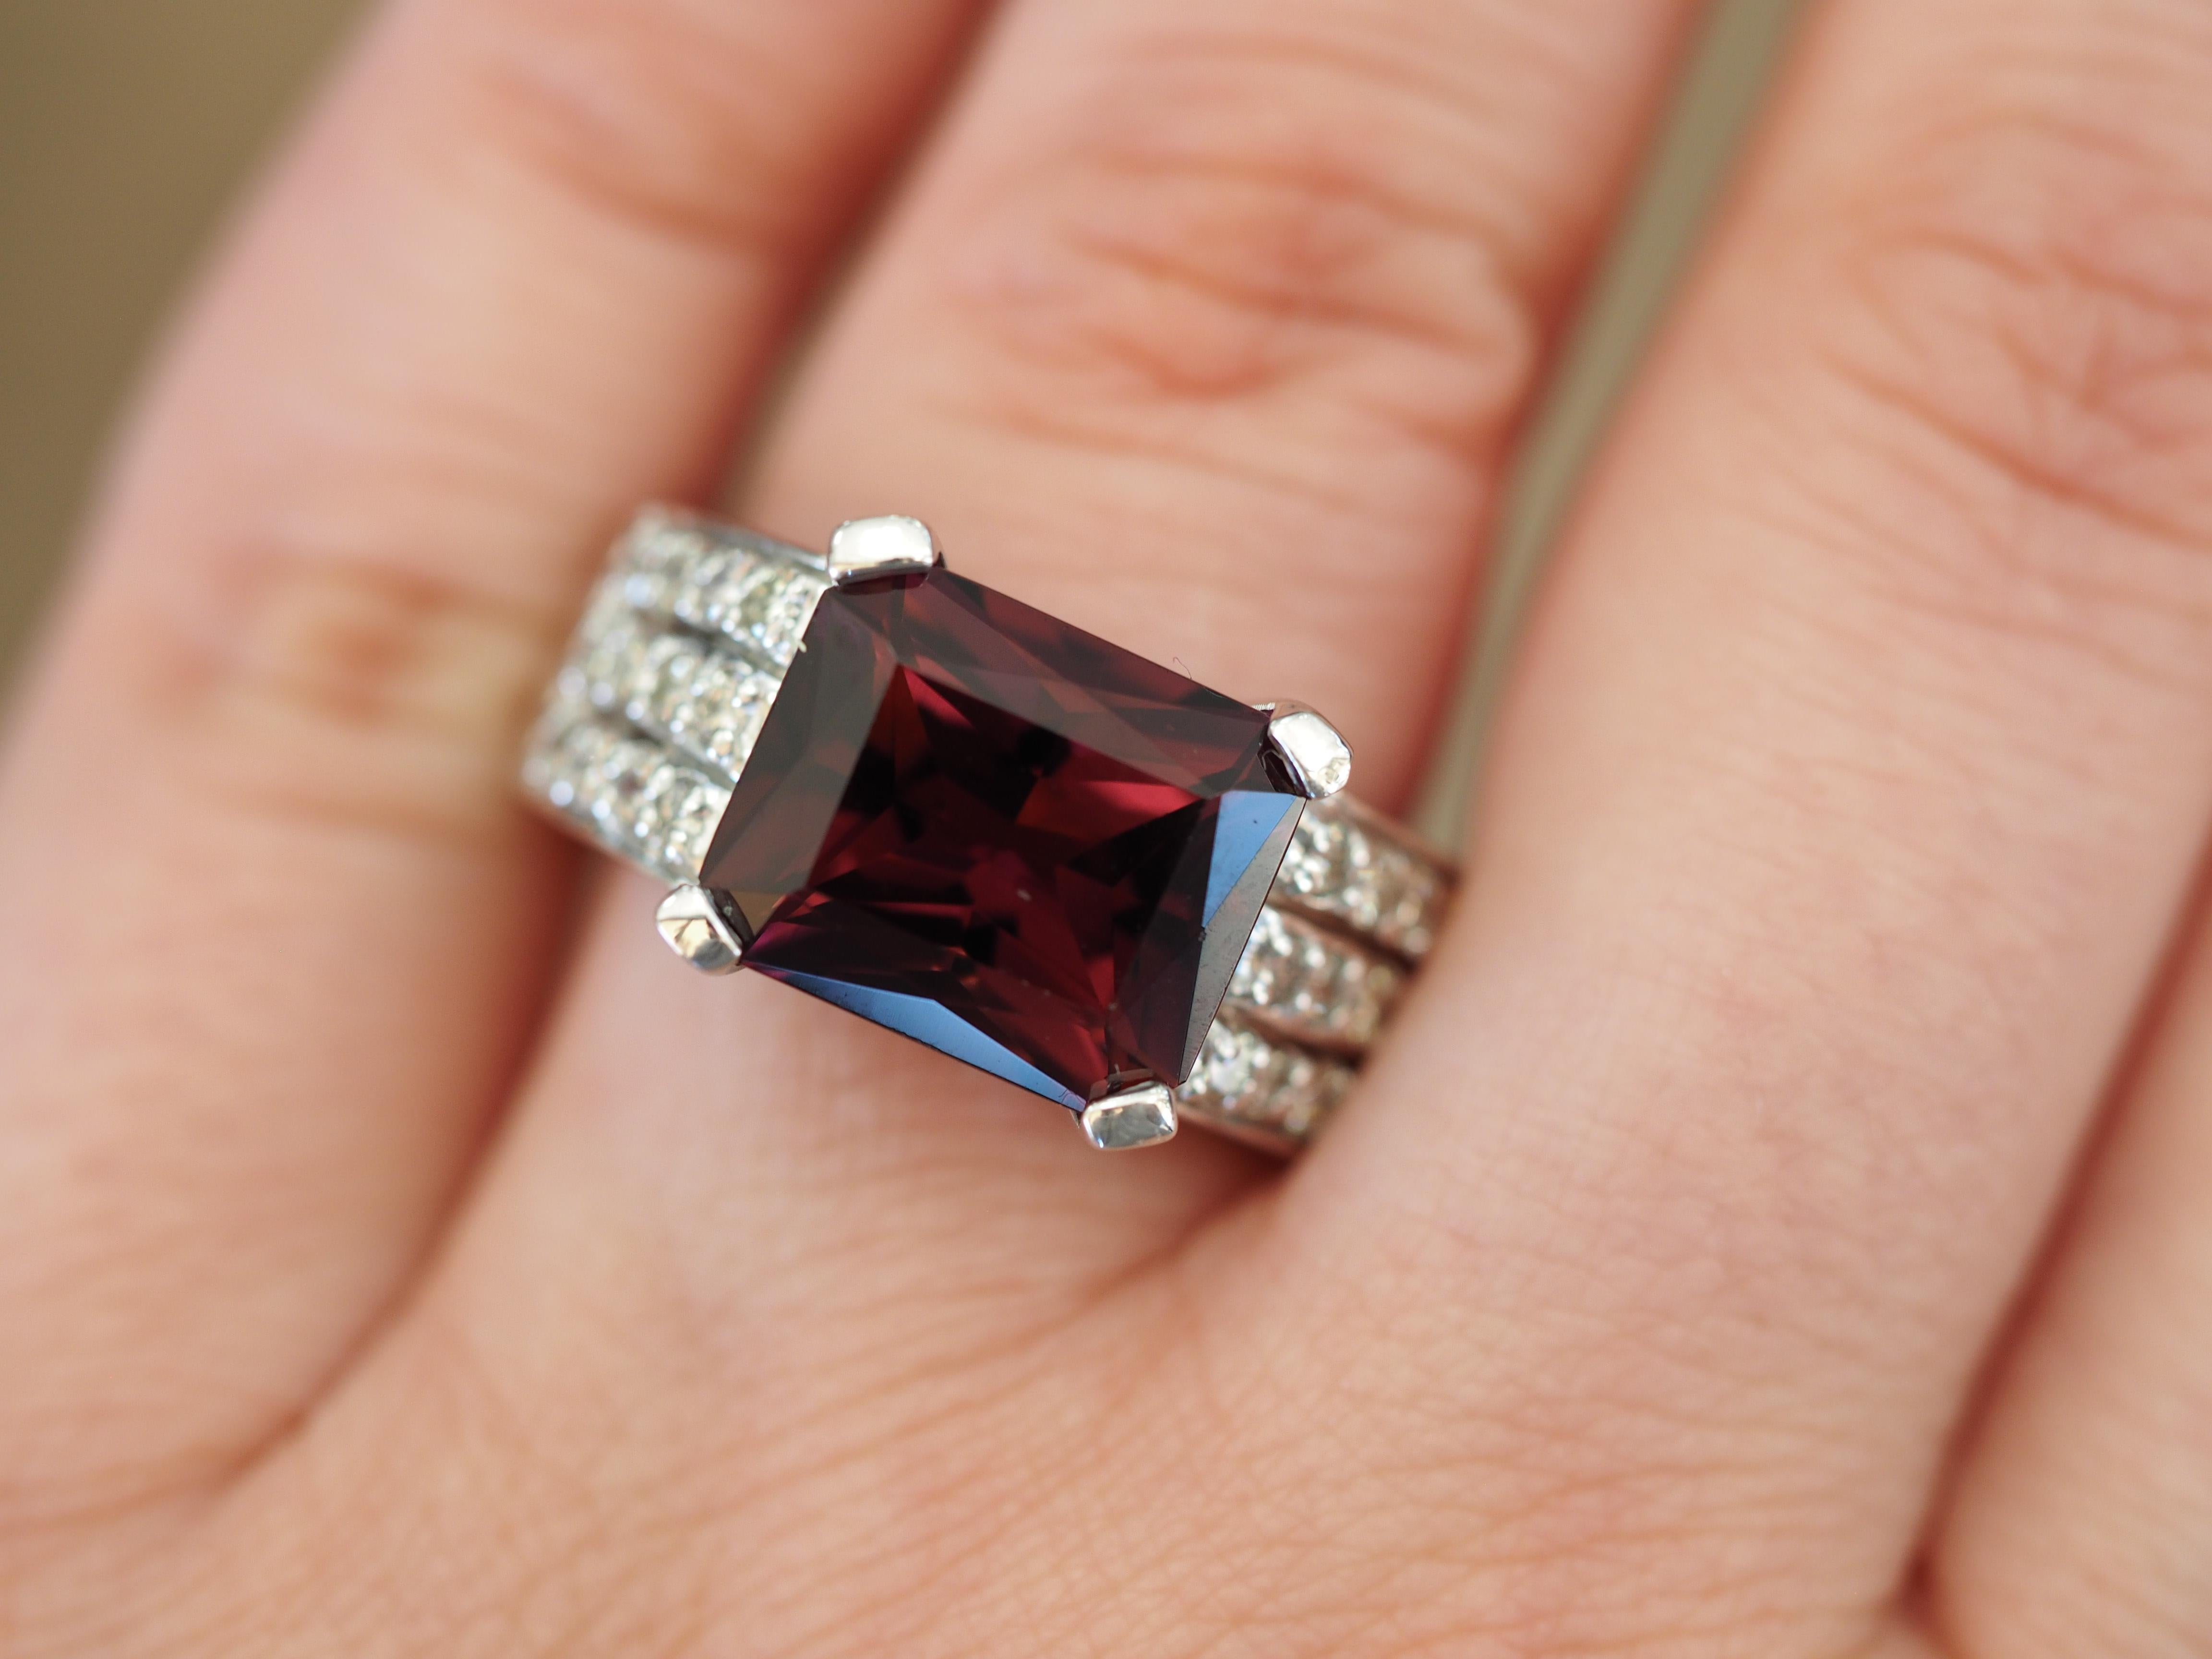 This modern vintage design includes a one of a kind rich emerald cut Garnet. The  Garnet has a deeply desired rich color, the pinkish red color are immediately captivating at first glance. The lavish tanzanite weighs 6.3 Carats and is accented with 